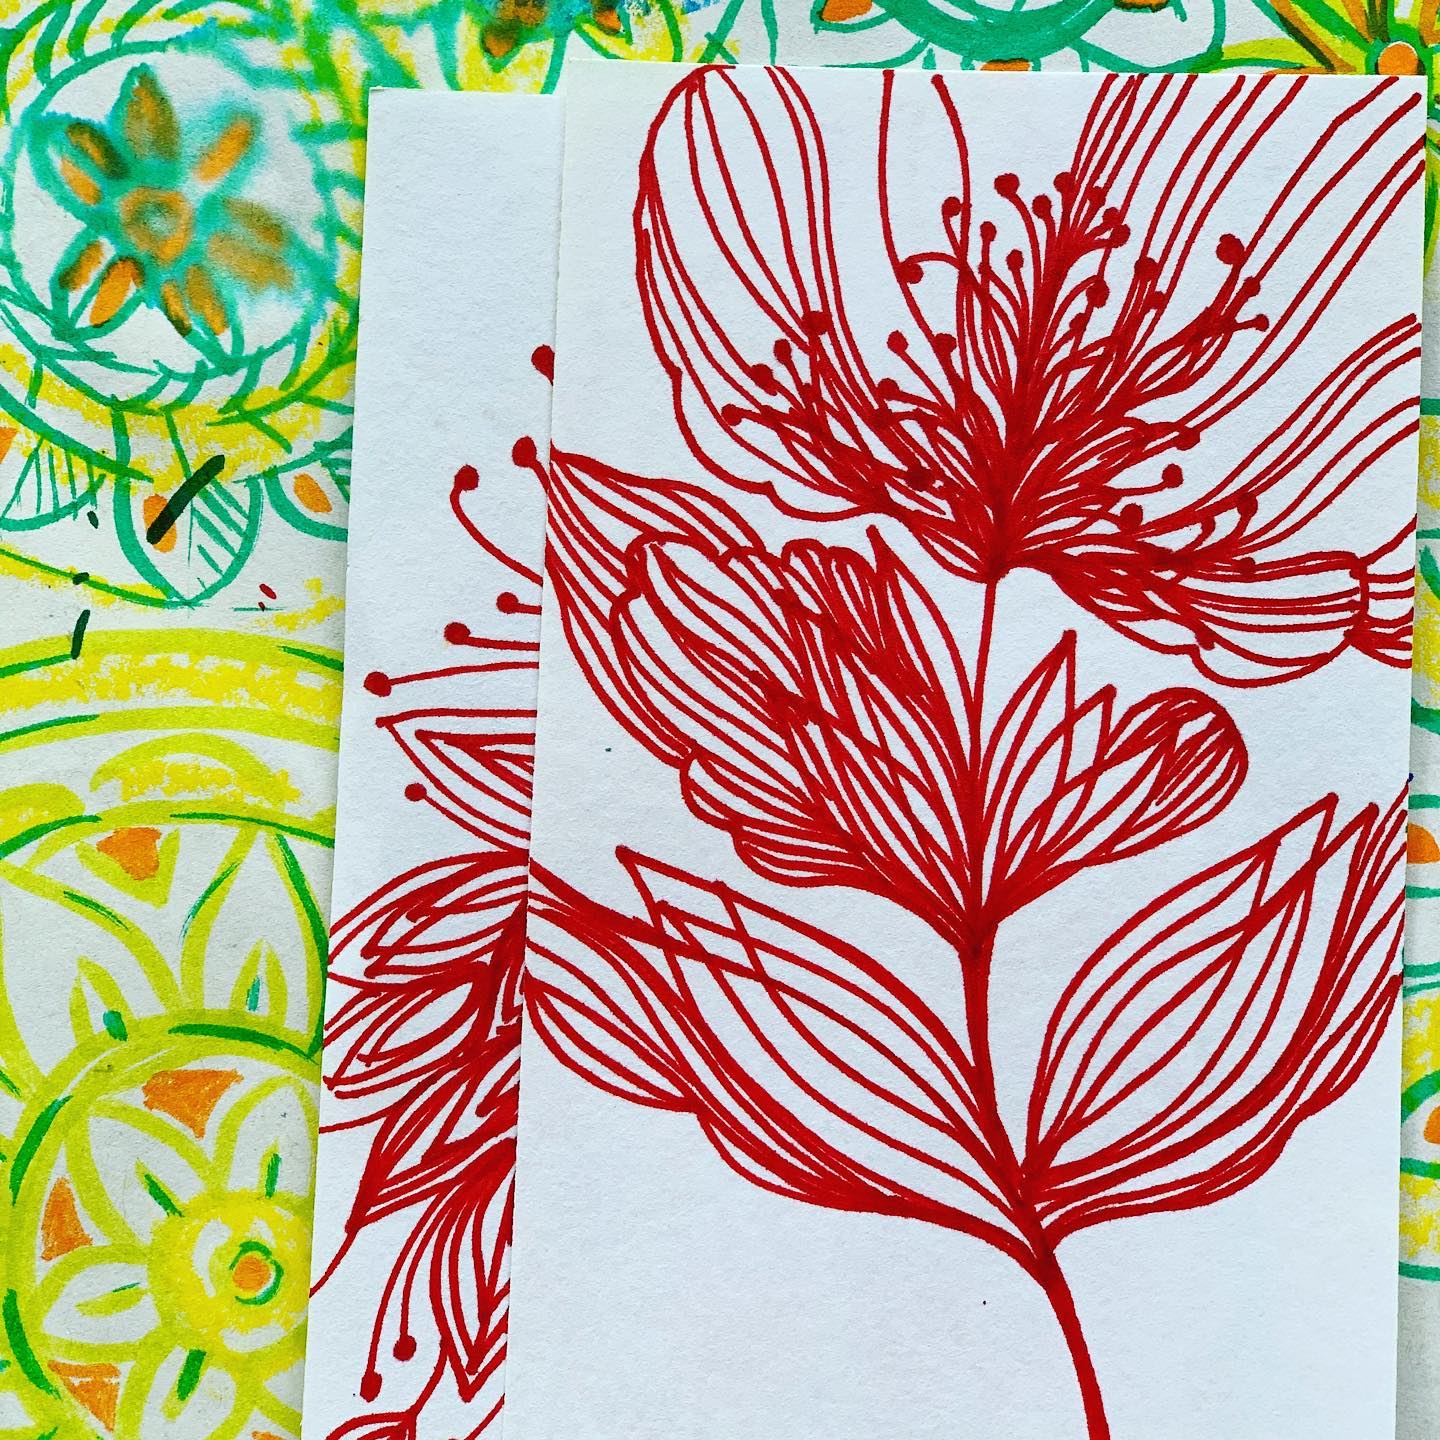 Floral doodles are always fascinating!